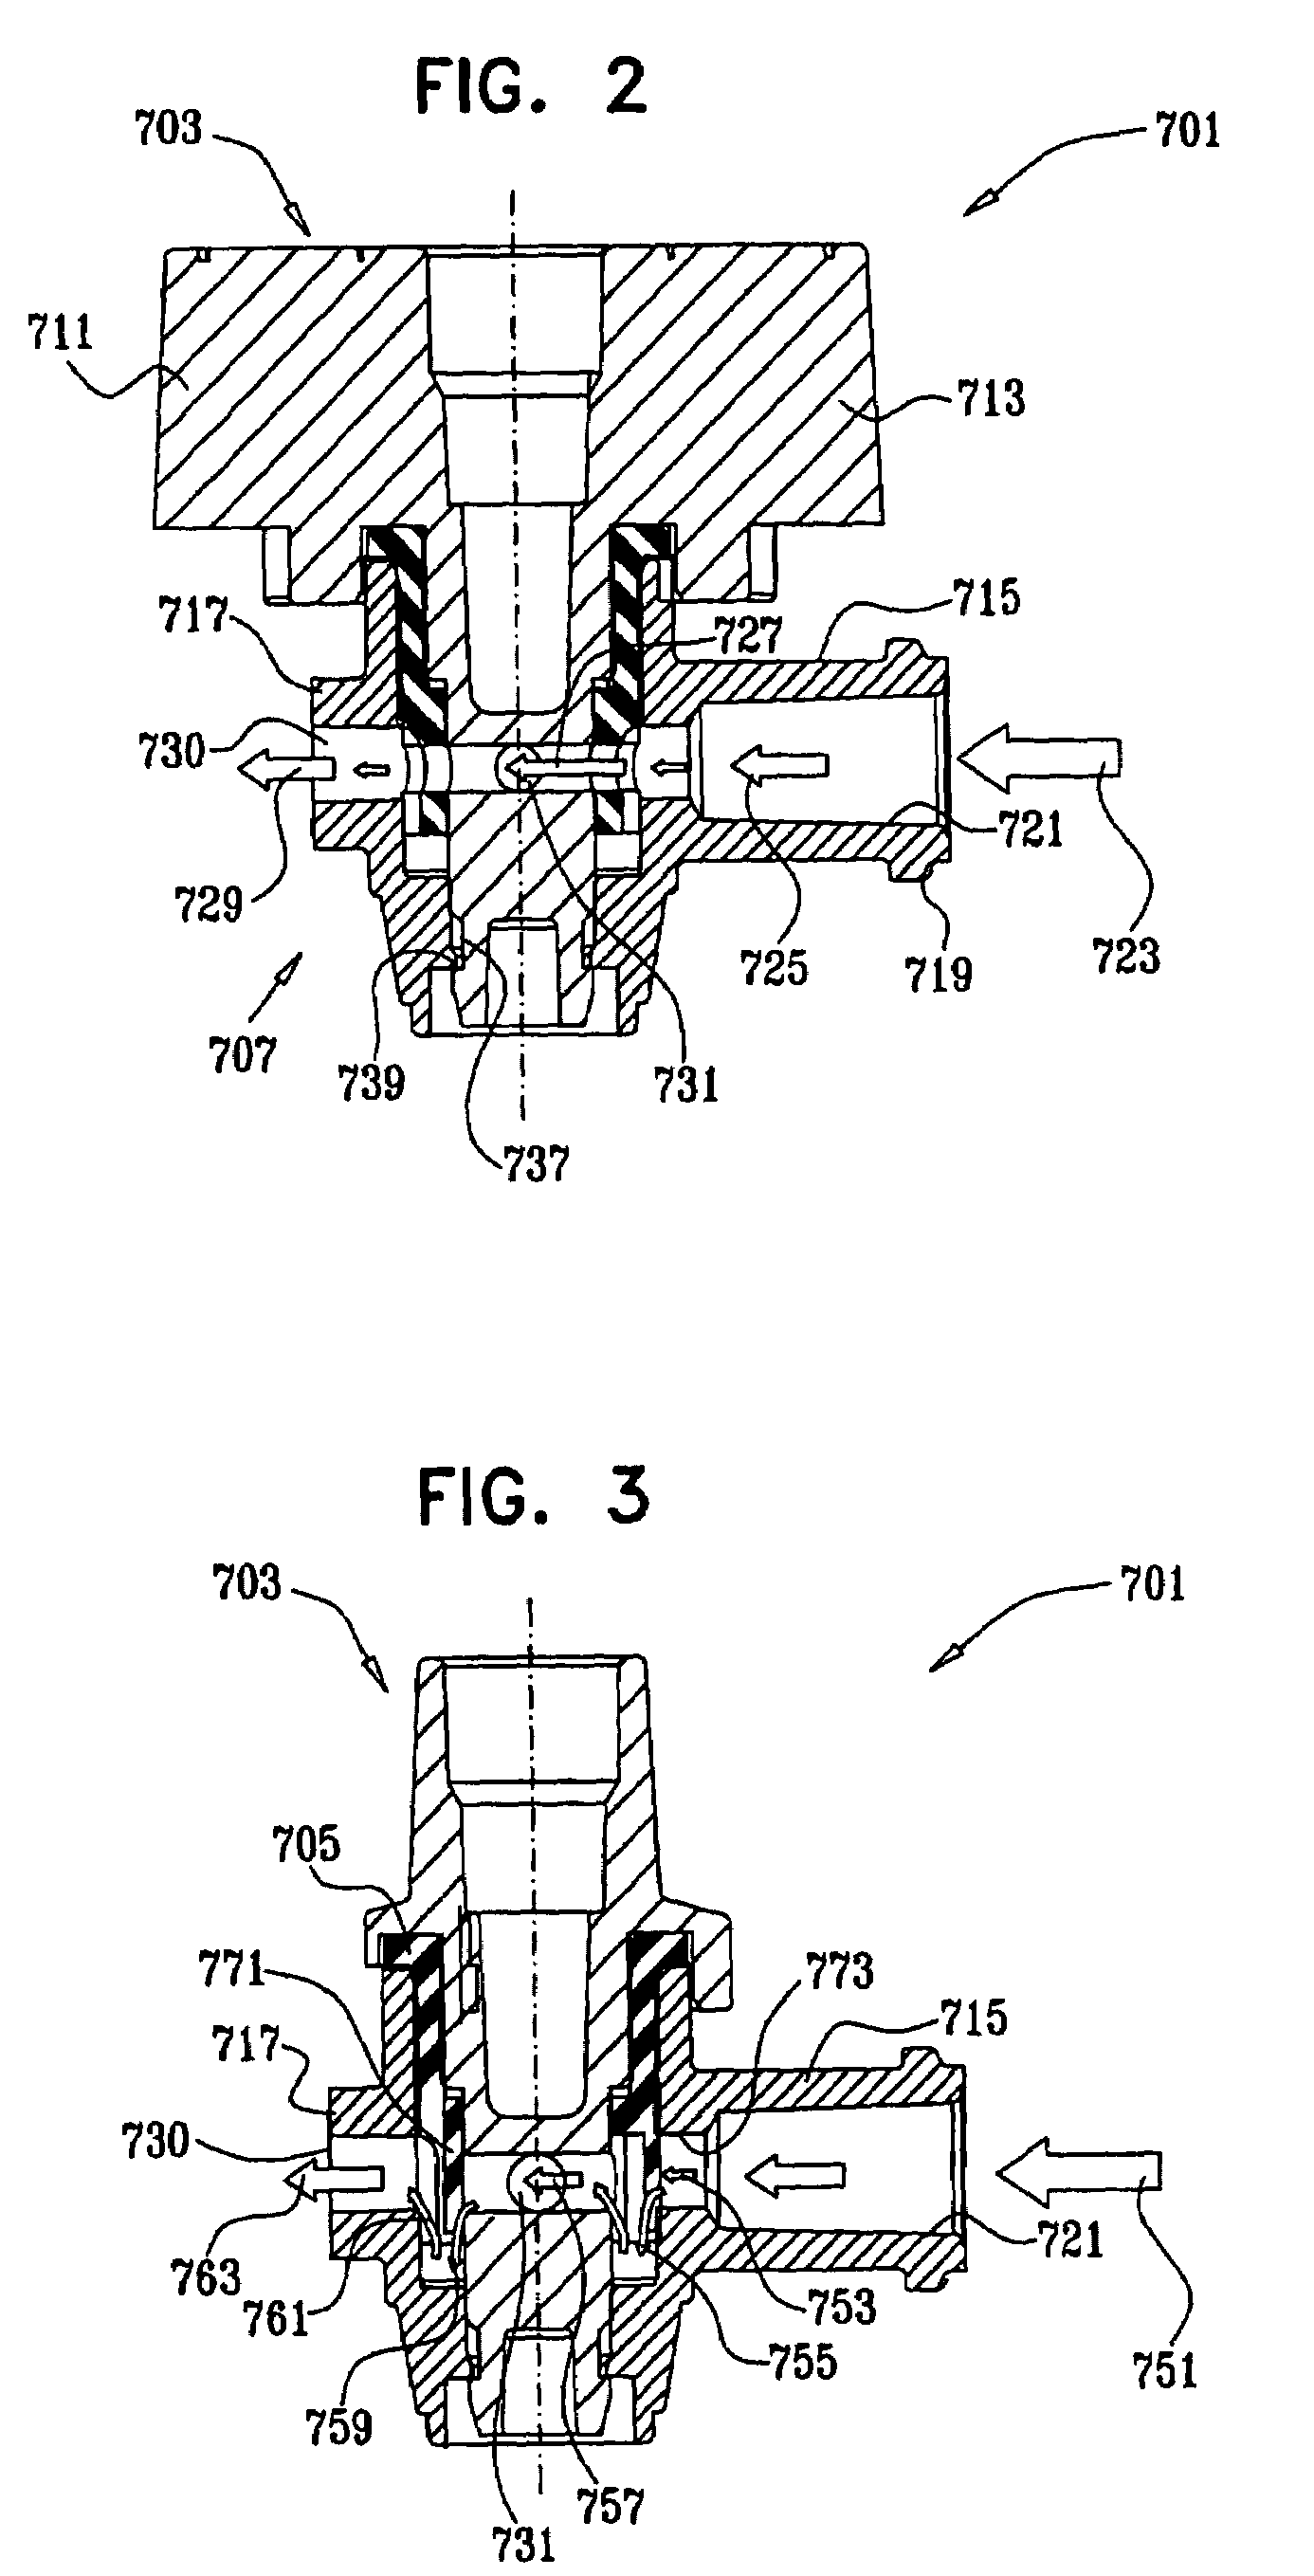 Anesthesia manifold and induction valve